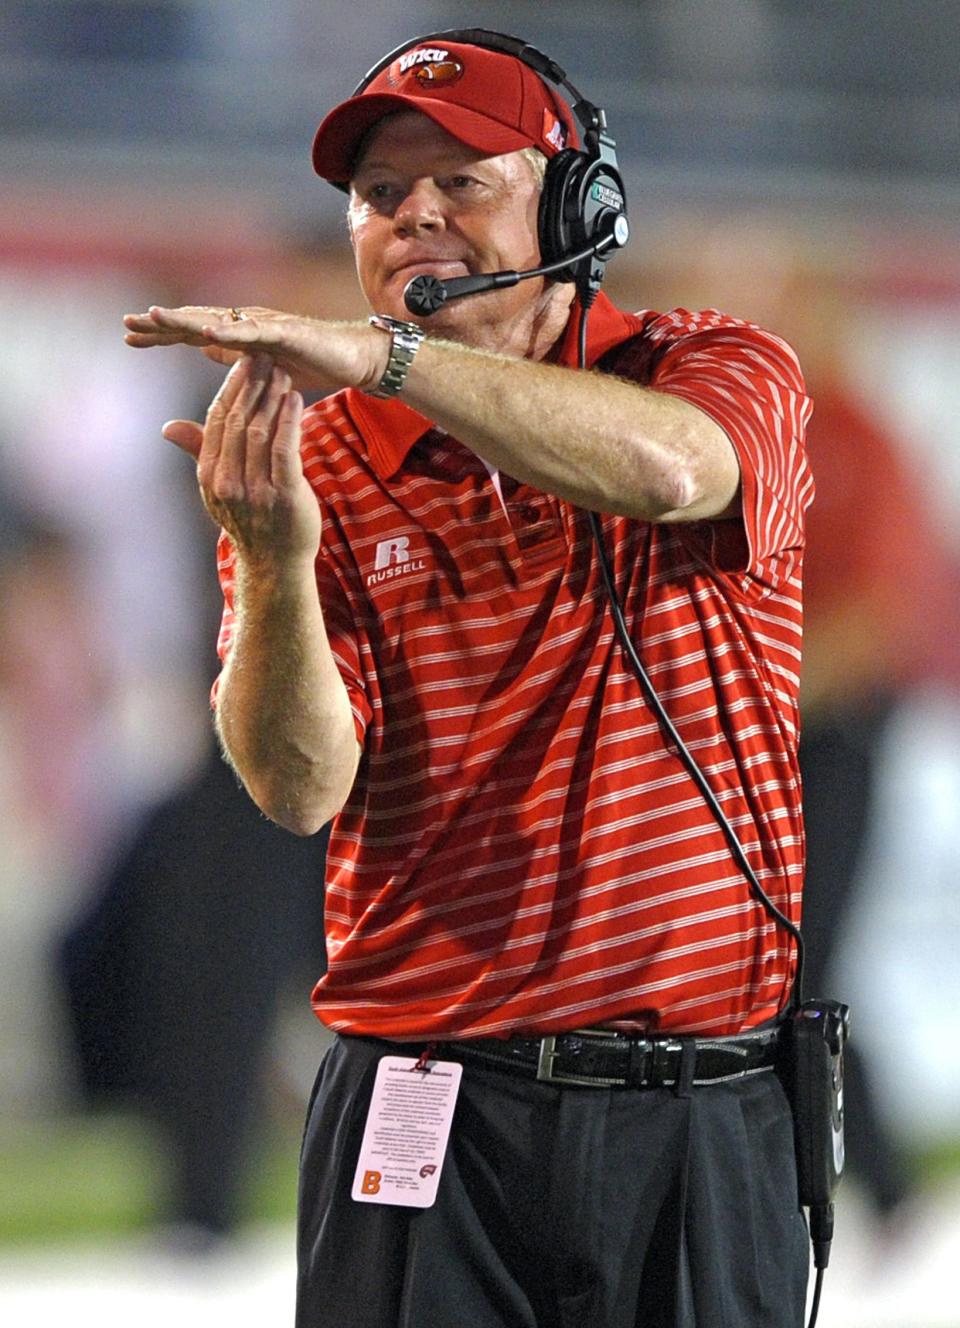 Western Kentucky head coach Bobby Petrino calls for a timeout against South Alabama during the fourth quarter of an NCAA college football game in Mobile, Ala. Things haven't gone as well as Petrino had hoped in his coaching return with Western Kentucky. The Hilltoppers are 4-4 and out of Sun Belt contention, needing to win out just to have an outside chance for a second straight bowl bid. ( 